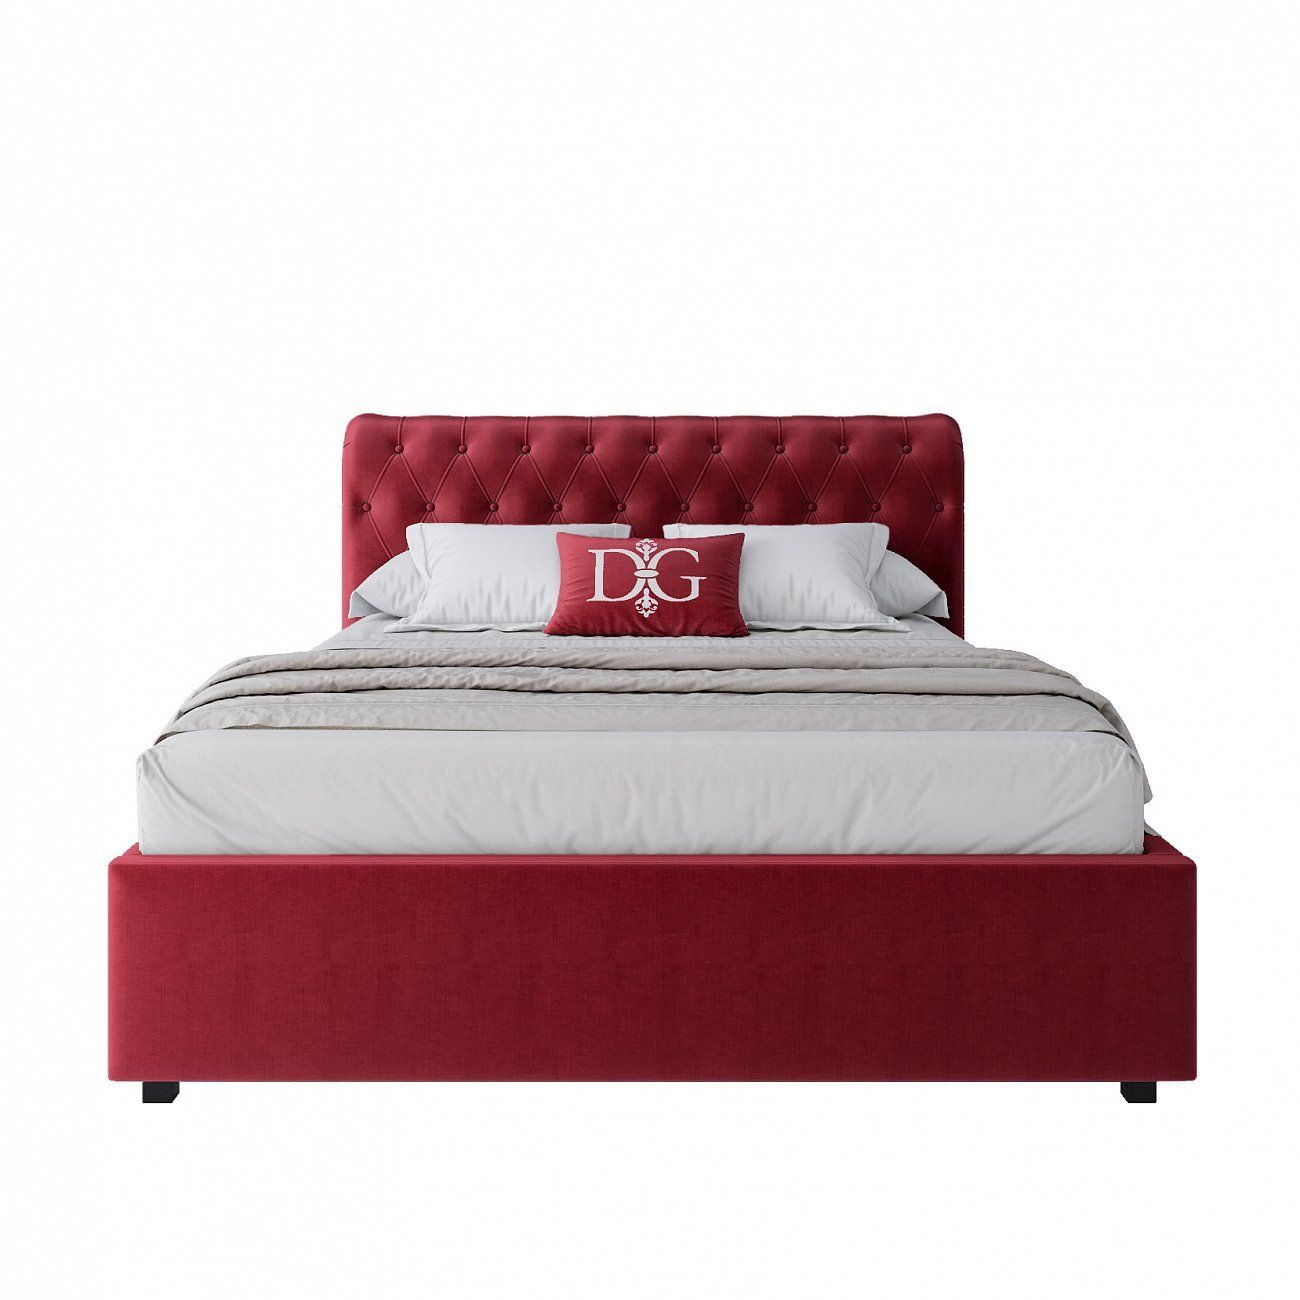 Teenage bed with carriage screed 140x200 red Sweet Dreams